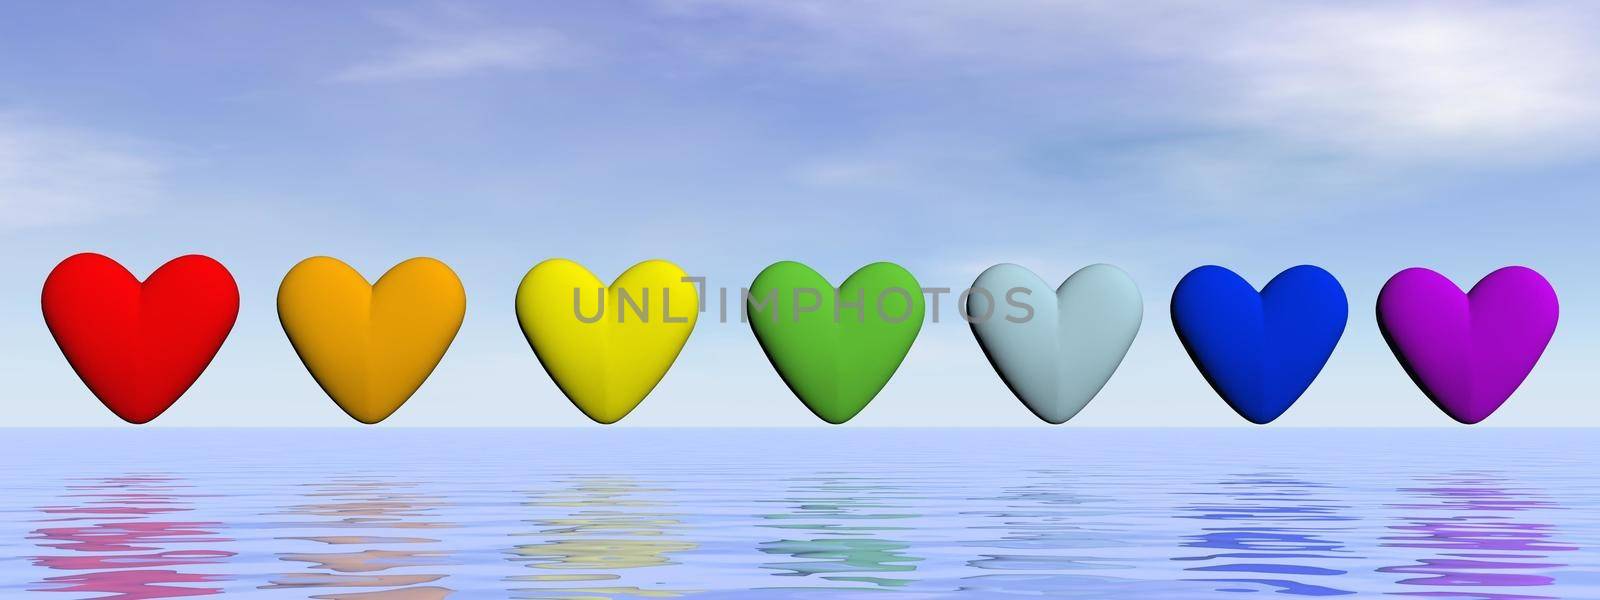 Seven hearts in a row with chakra colors upon water by beautiful day